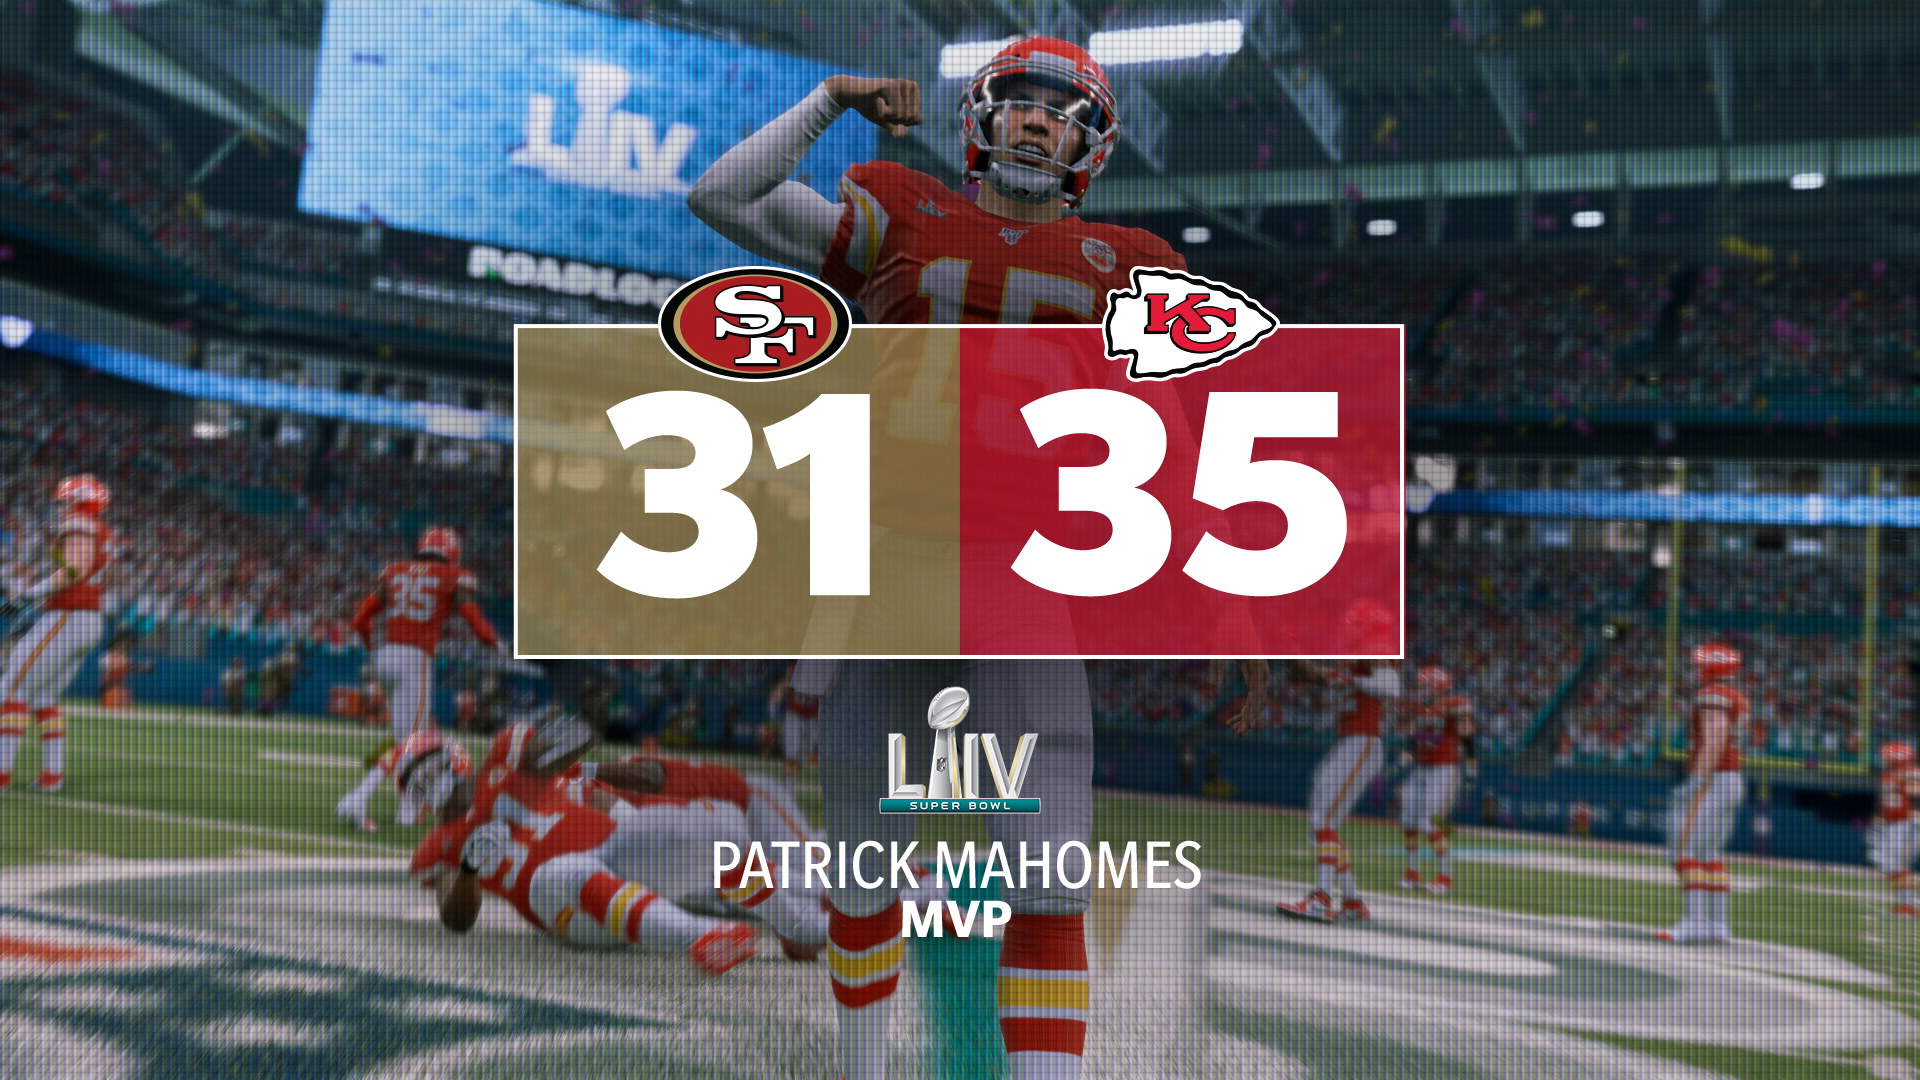 Kansas City Chiefs Win Super Bowl LIV Over the San Francisco 49ers in